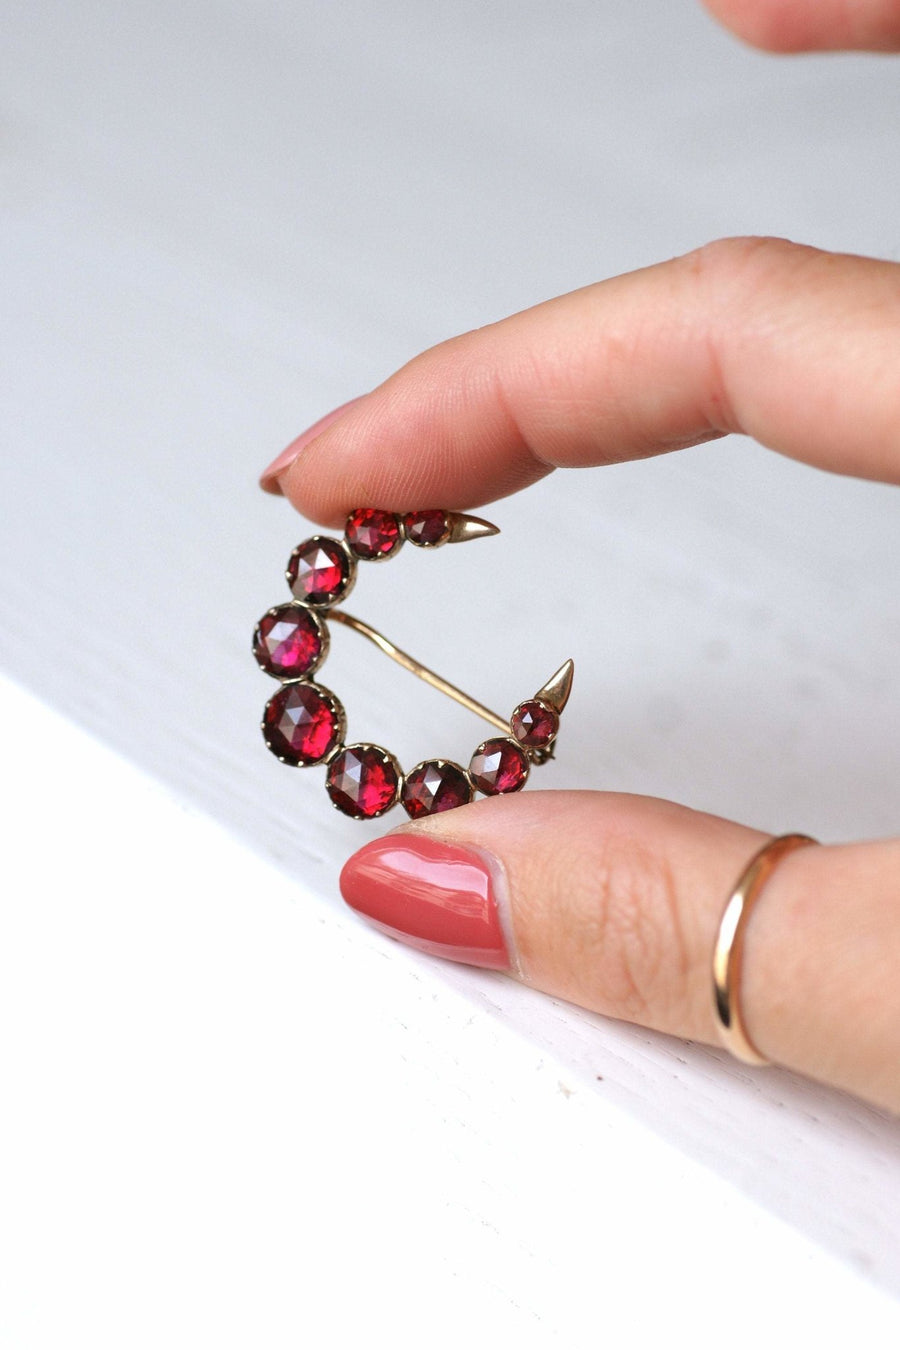 Antique moon crescent brooch in pink gold and garnets from Perpignan - Galerie Pénélope